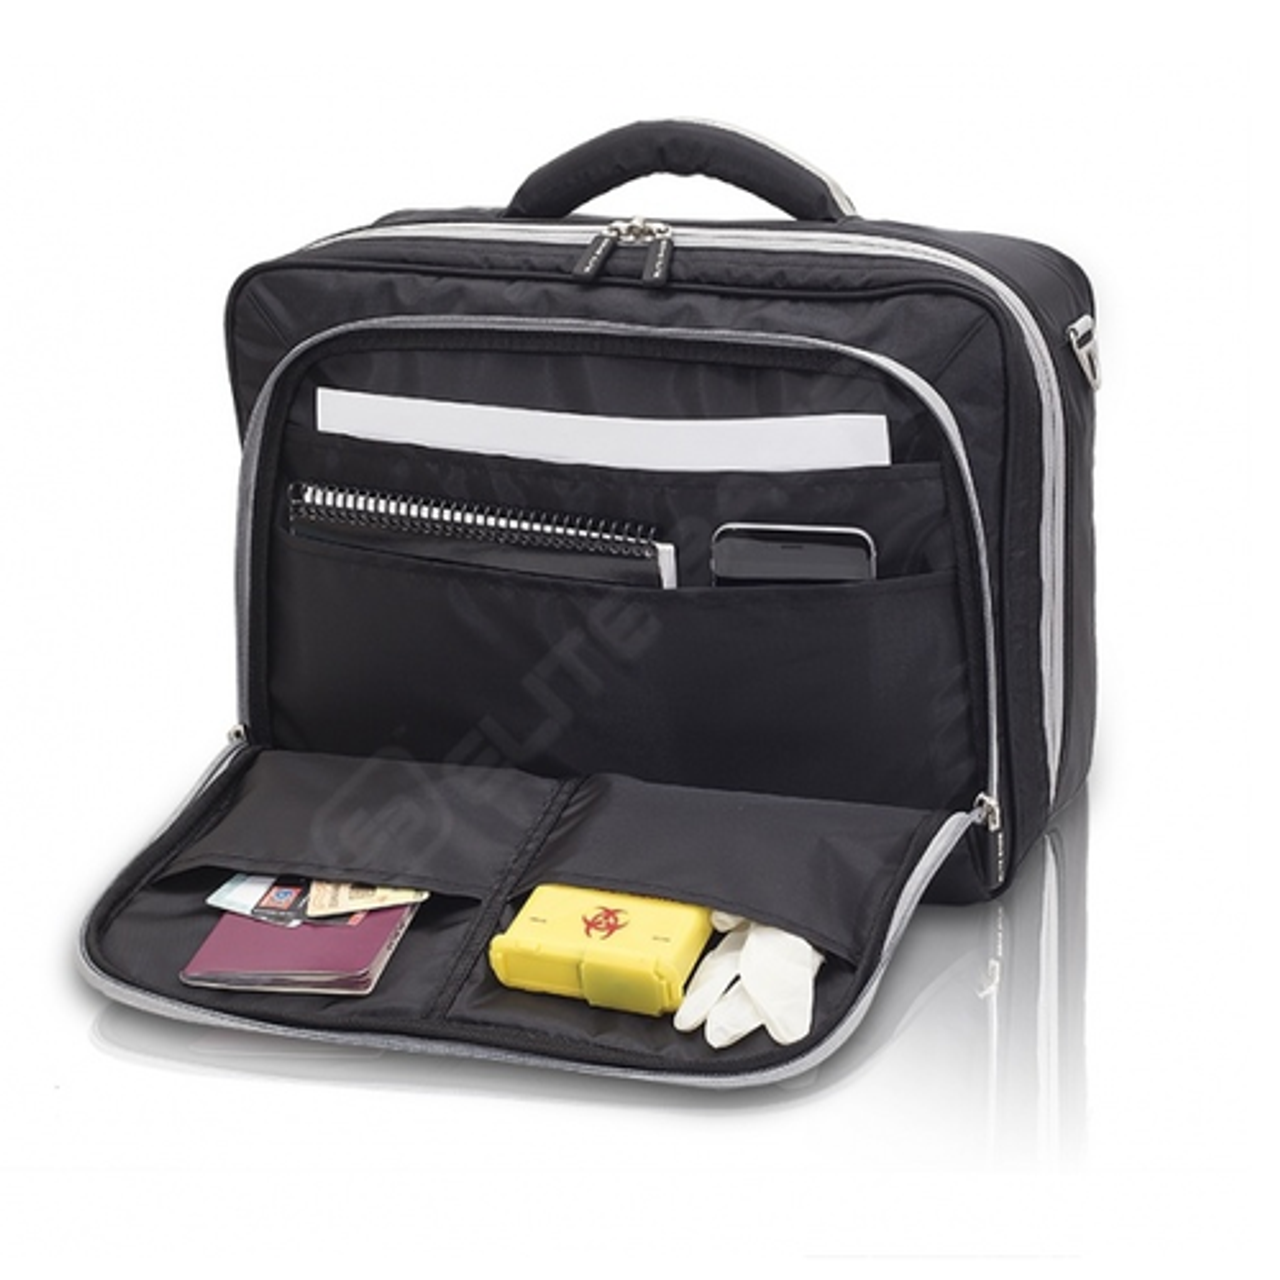 Home - Medical Assistance Bags and Accessories - Elite Bags